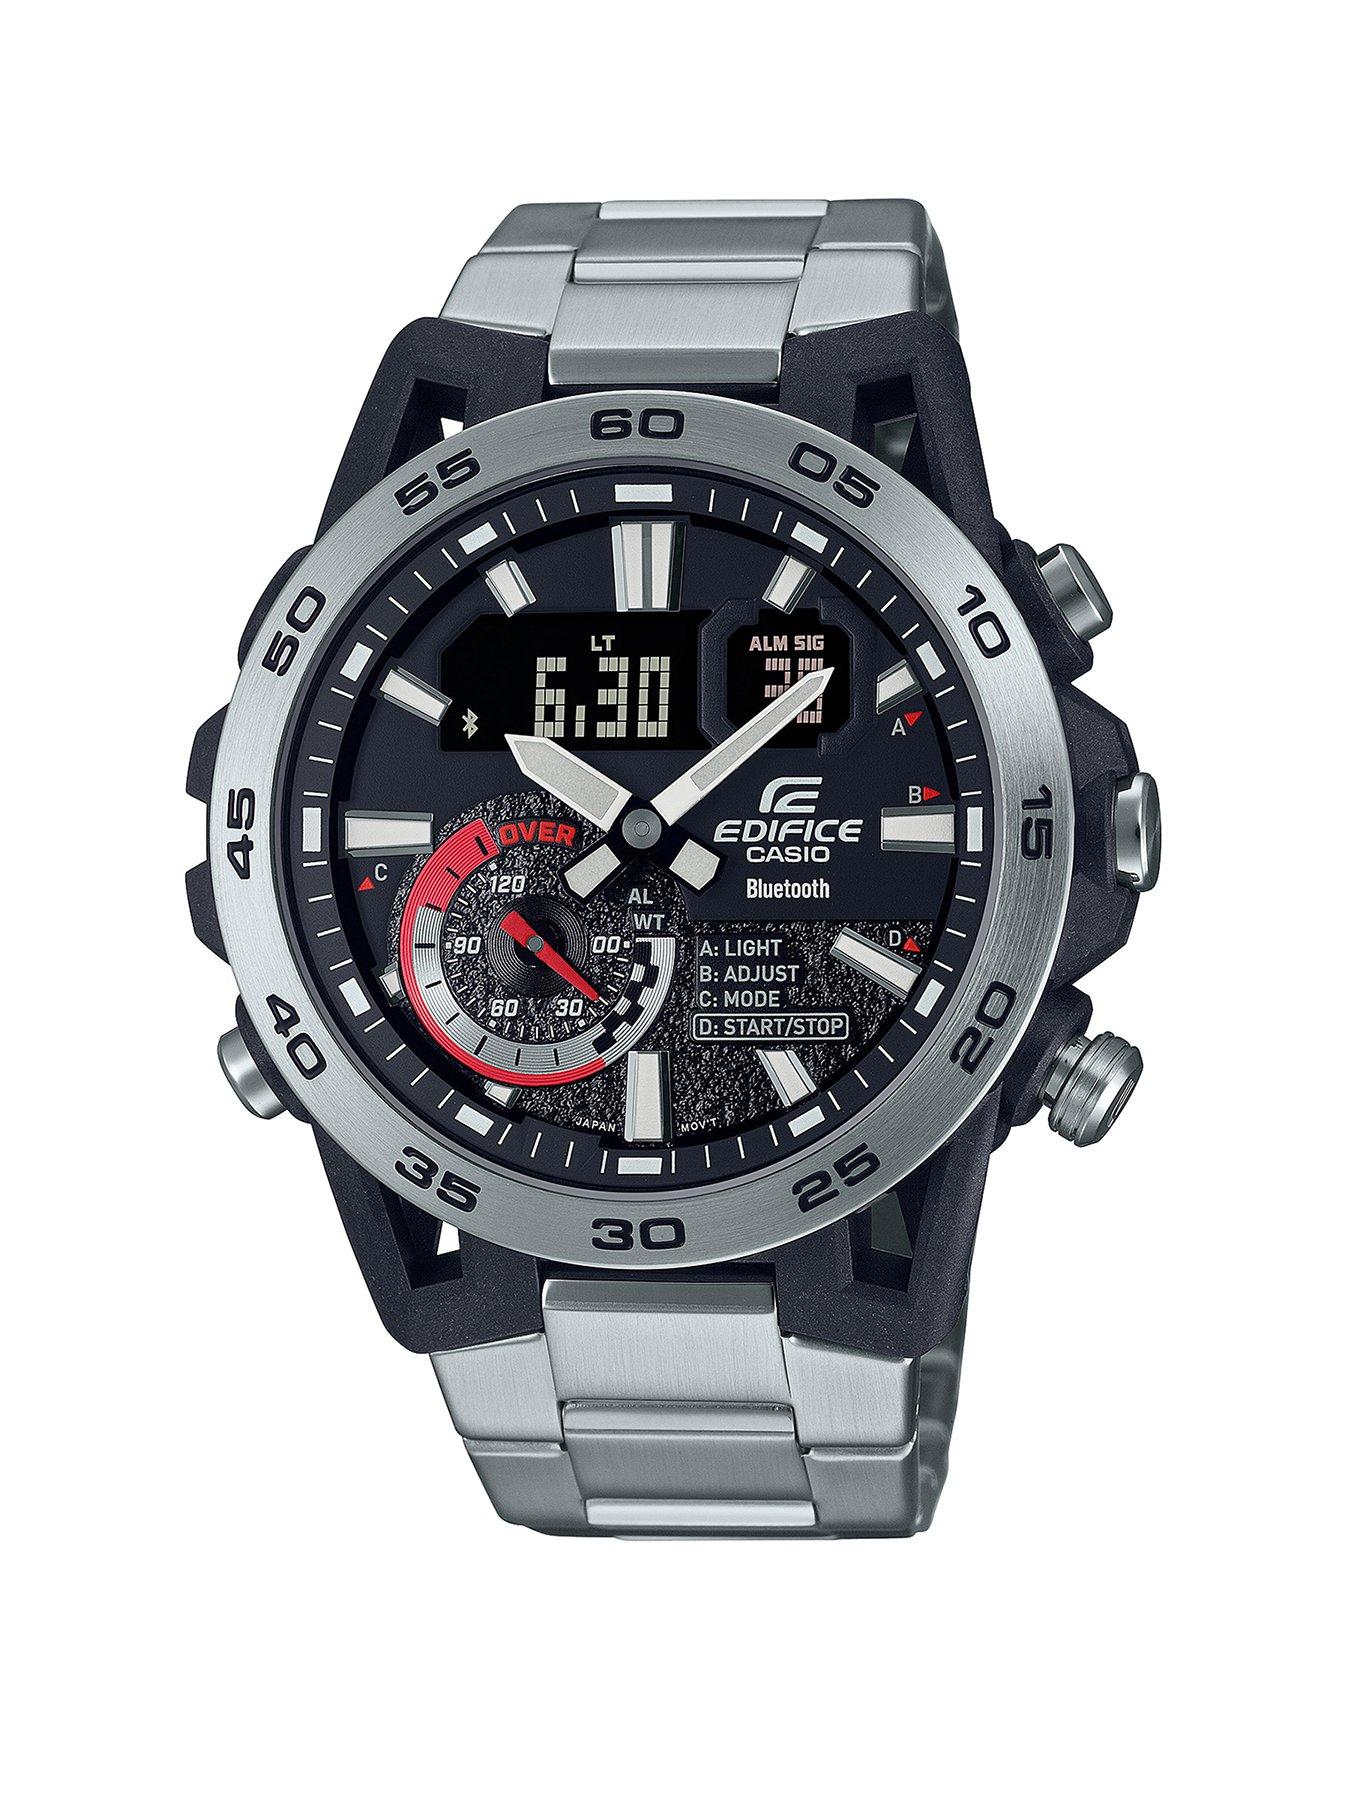 Casio Products | Casio Store Online at Very.co.uk